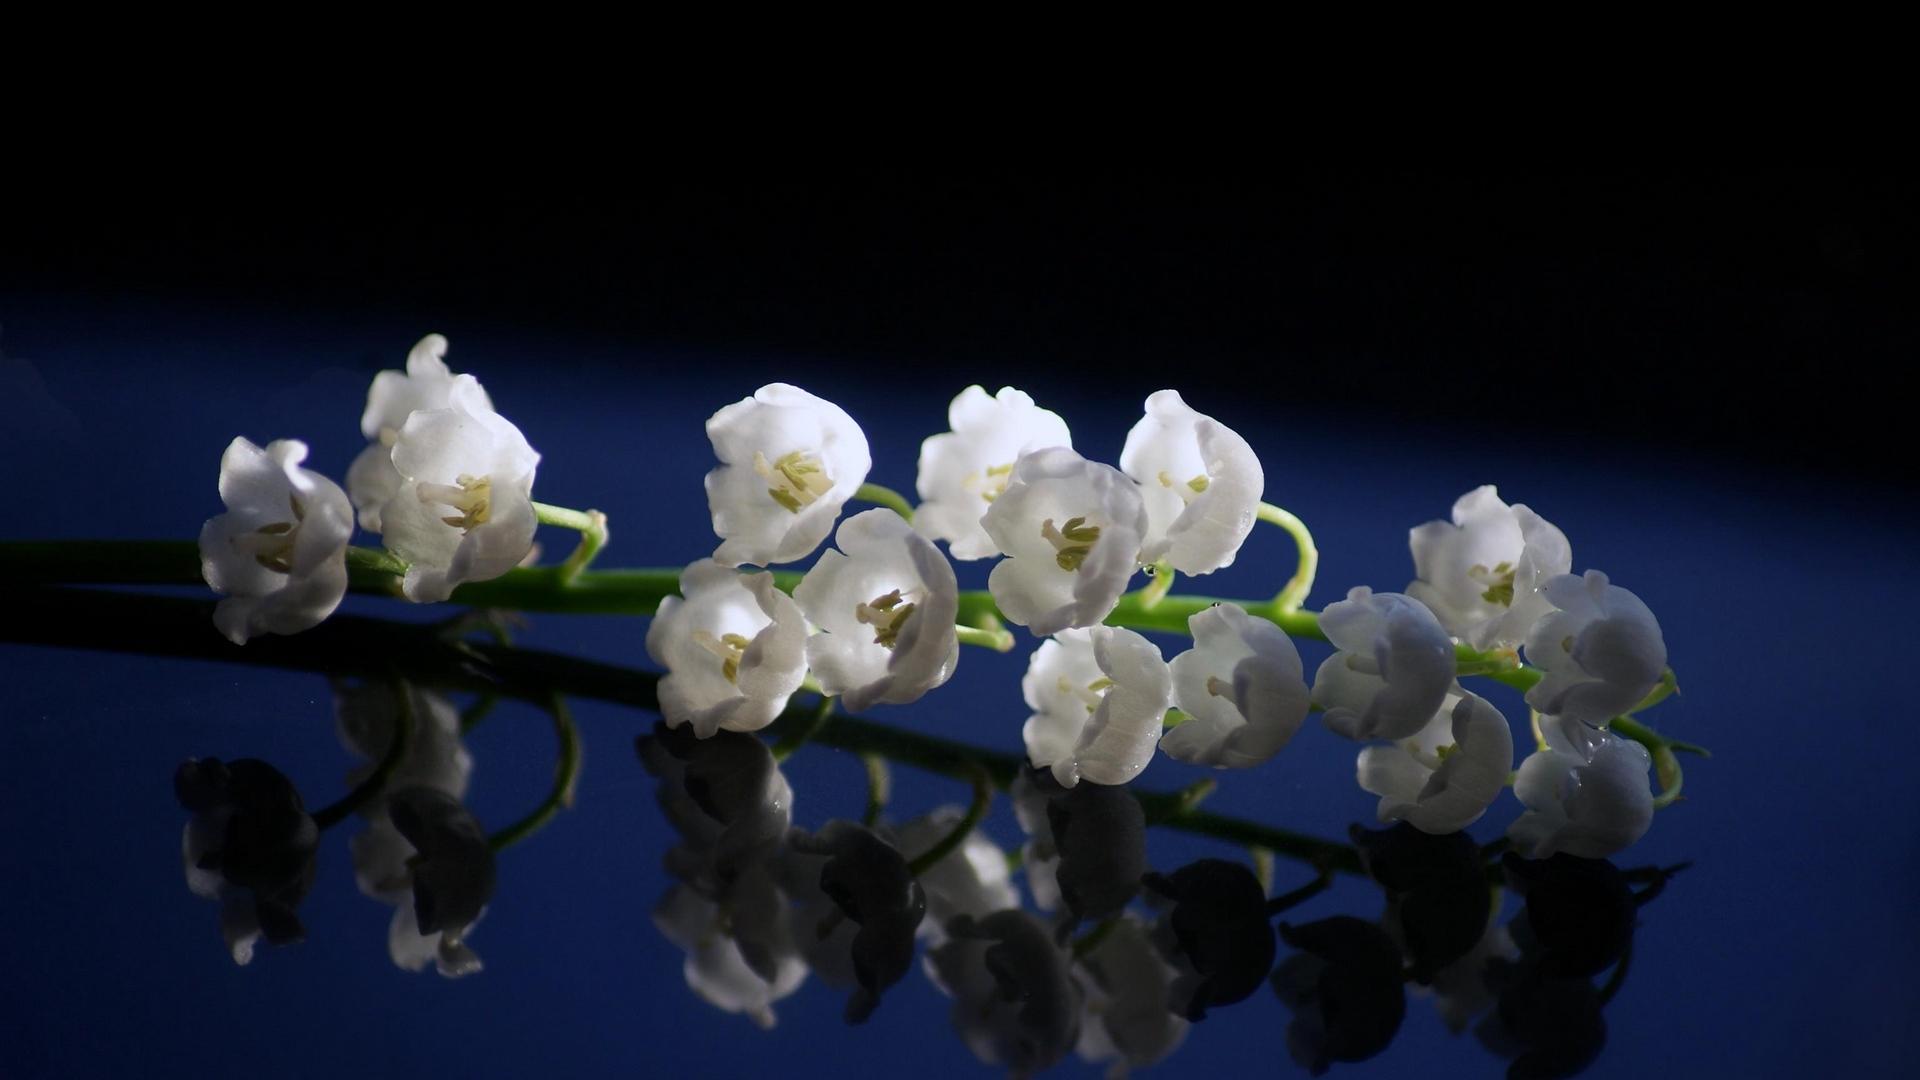 Download wallpaper 1920x1080 lily of the valley, close up, spring